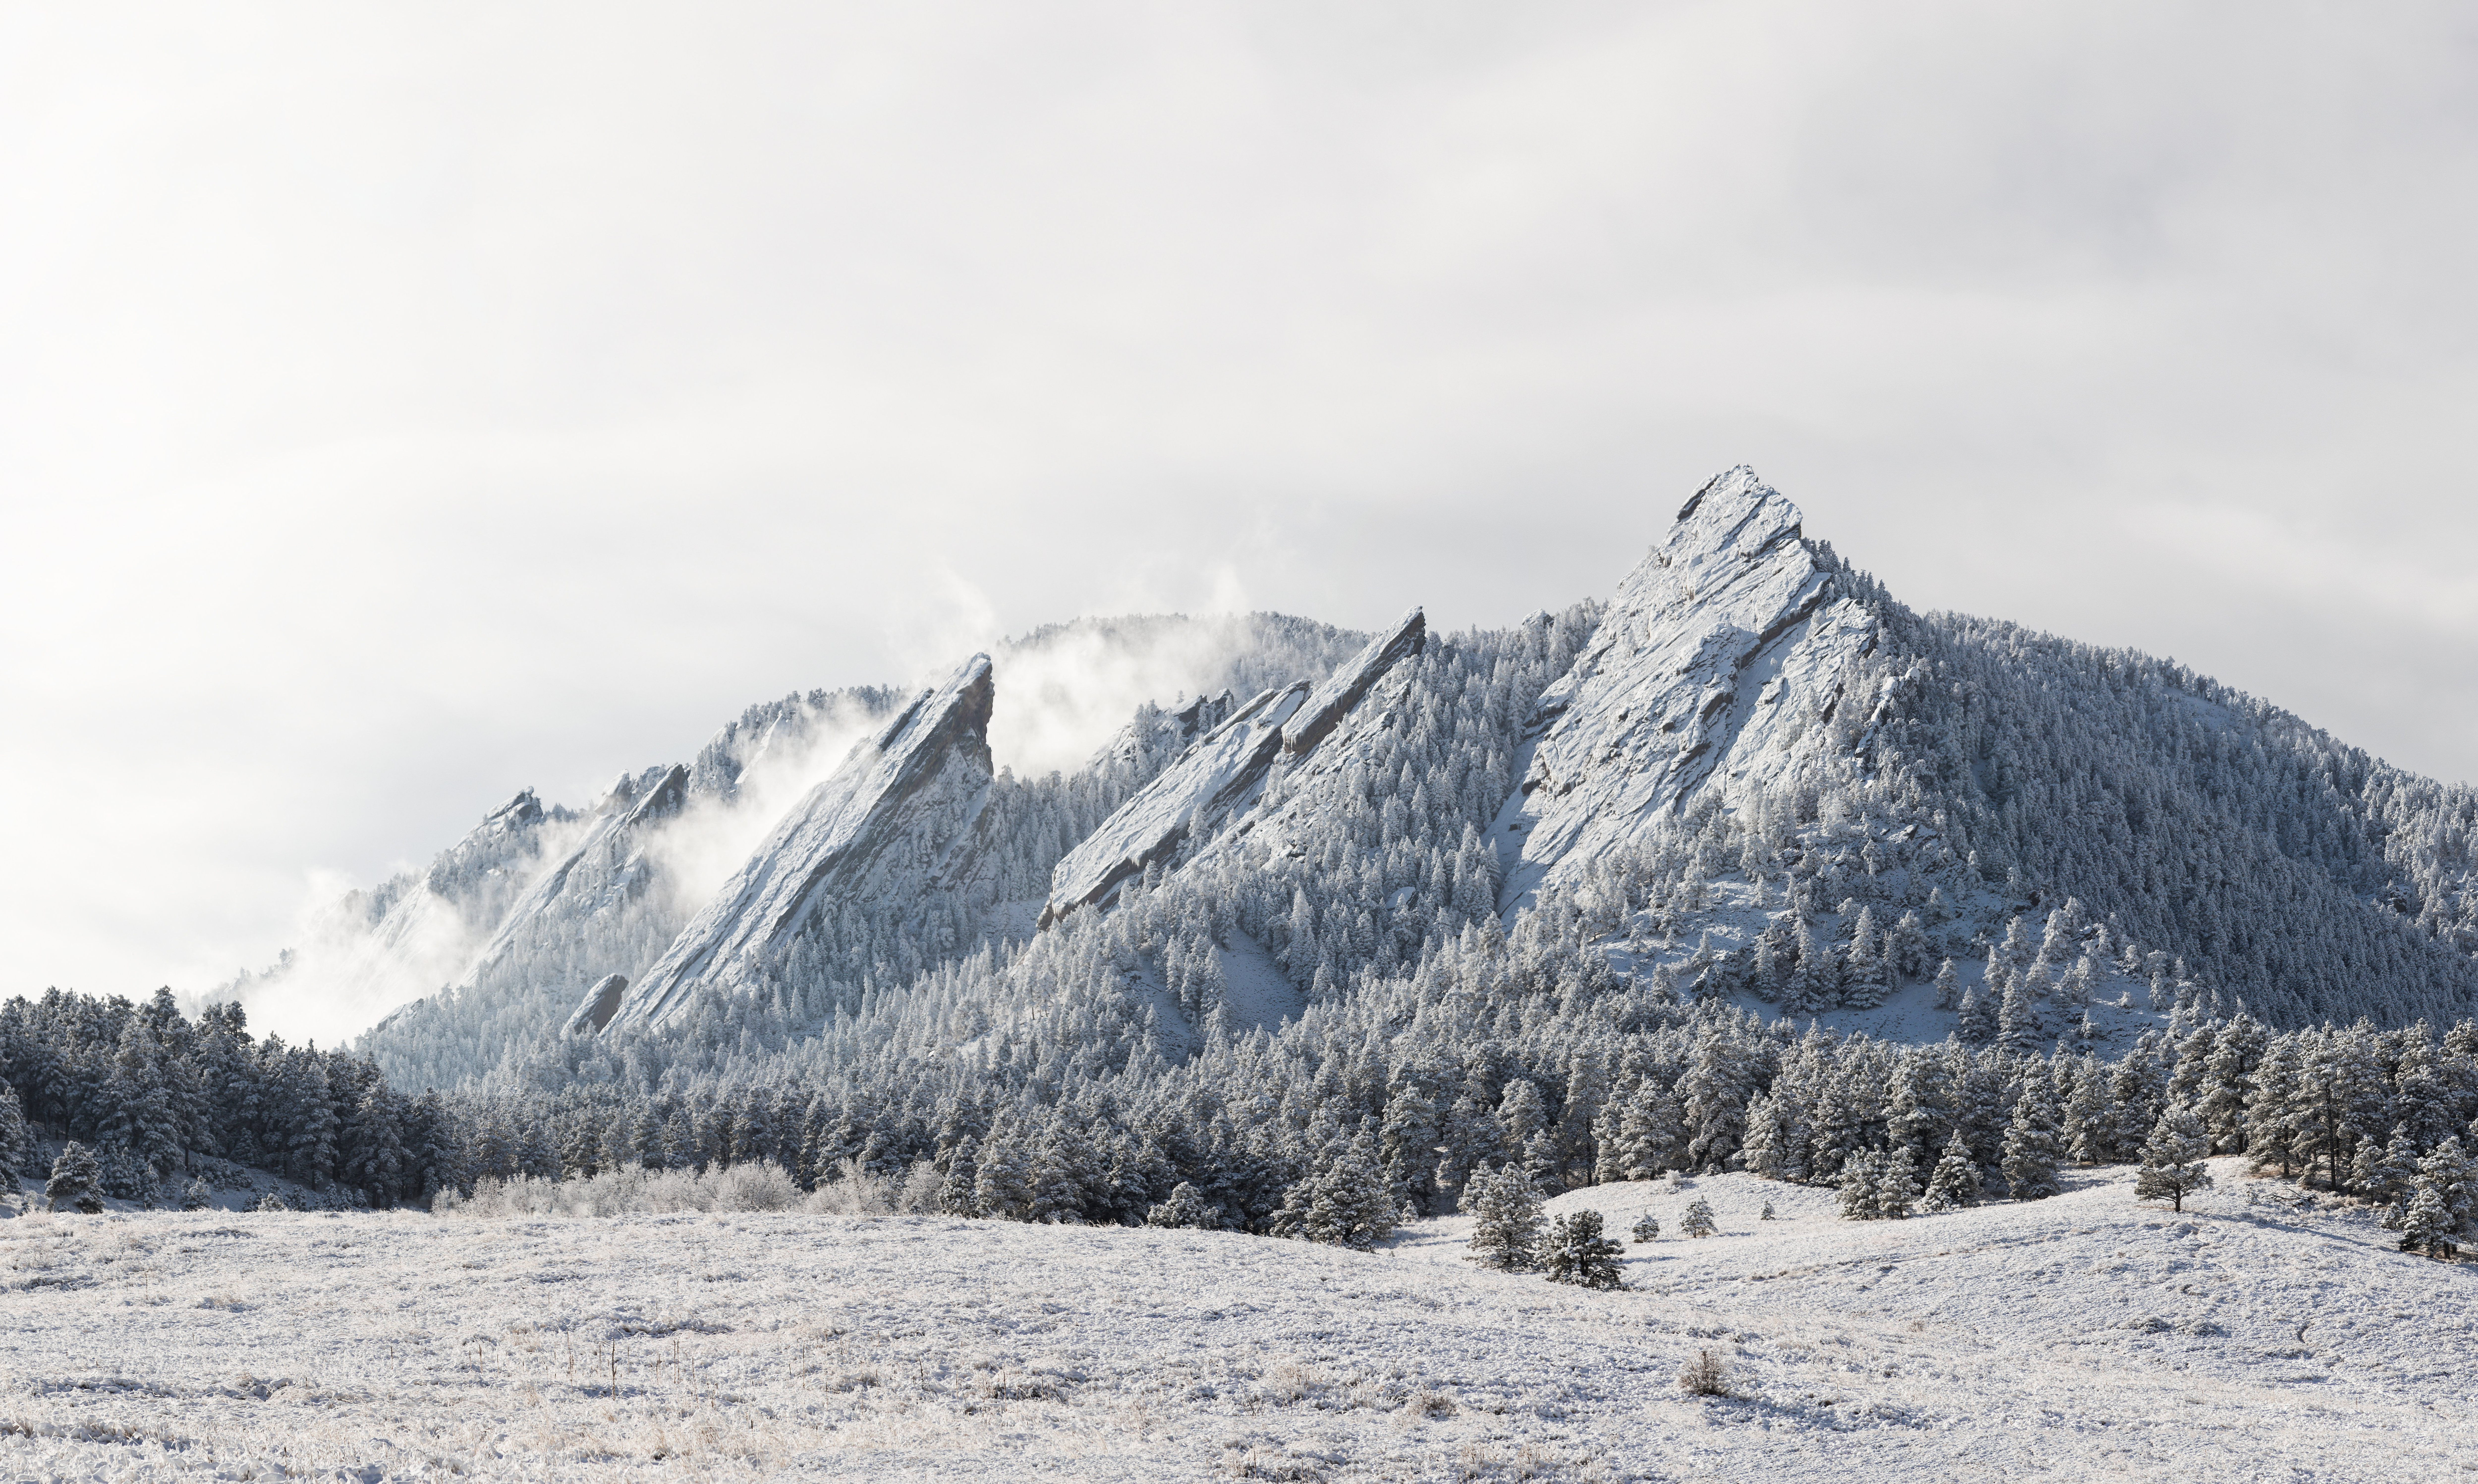 Boulder 4K wallpaper for your desktop or mobile screen free and easy to download